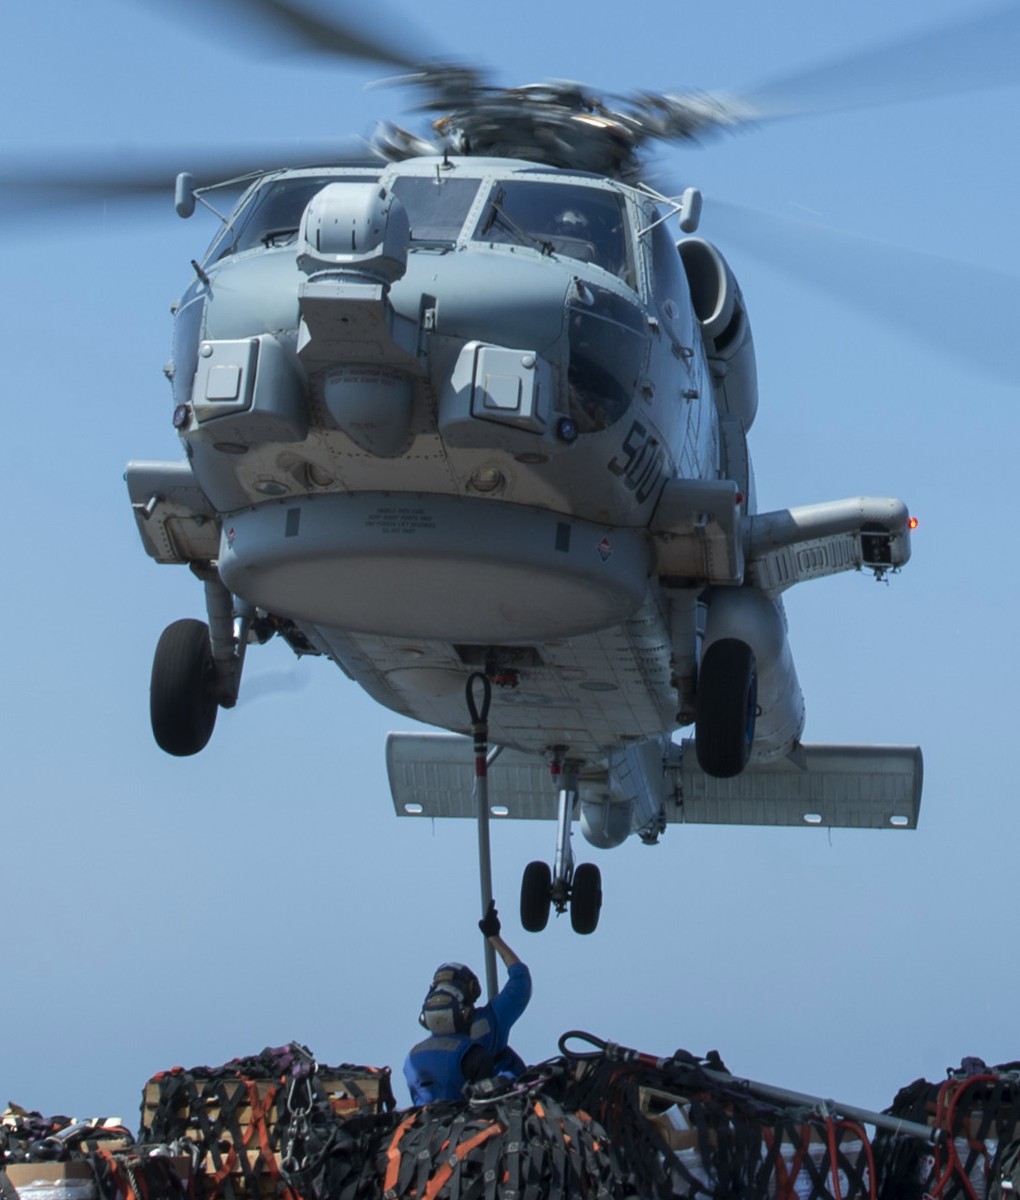 hsm-48 vipers helicopter maritime strike squadron mh-60r seahawk 2016 19 uss roosevelt ddg-80